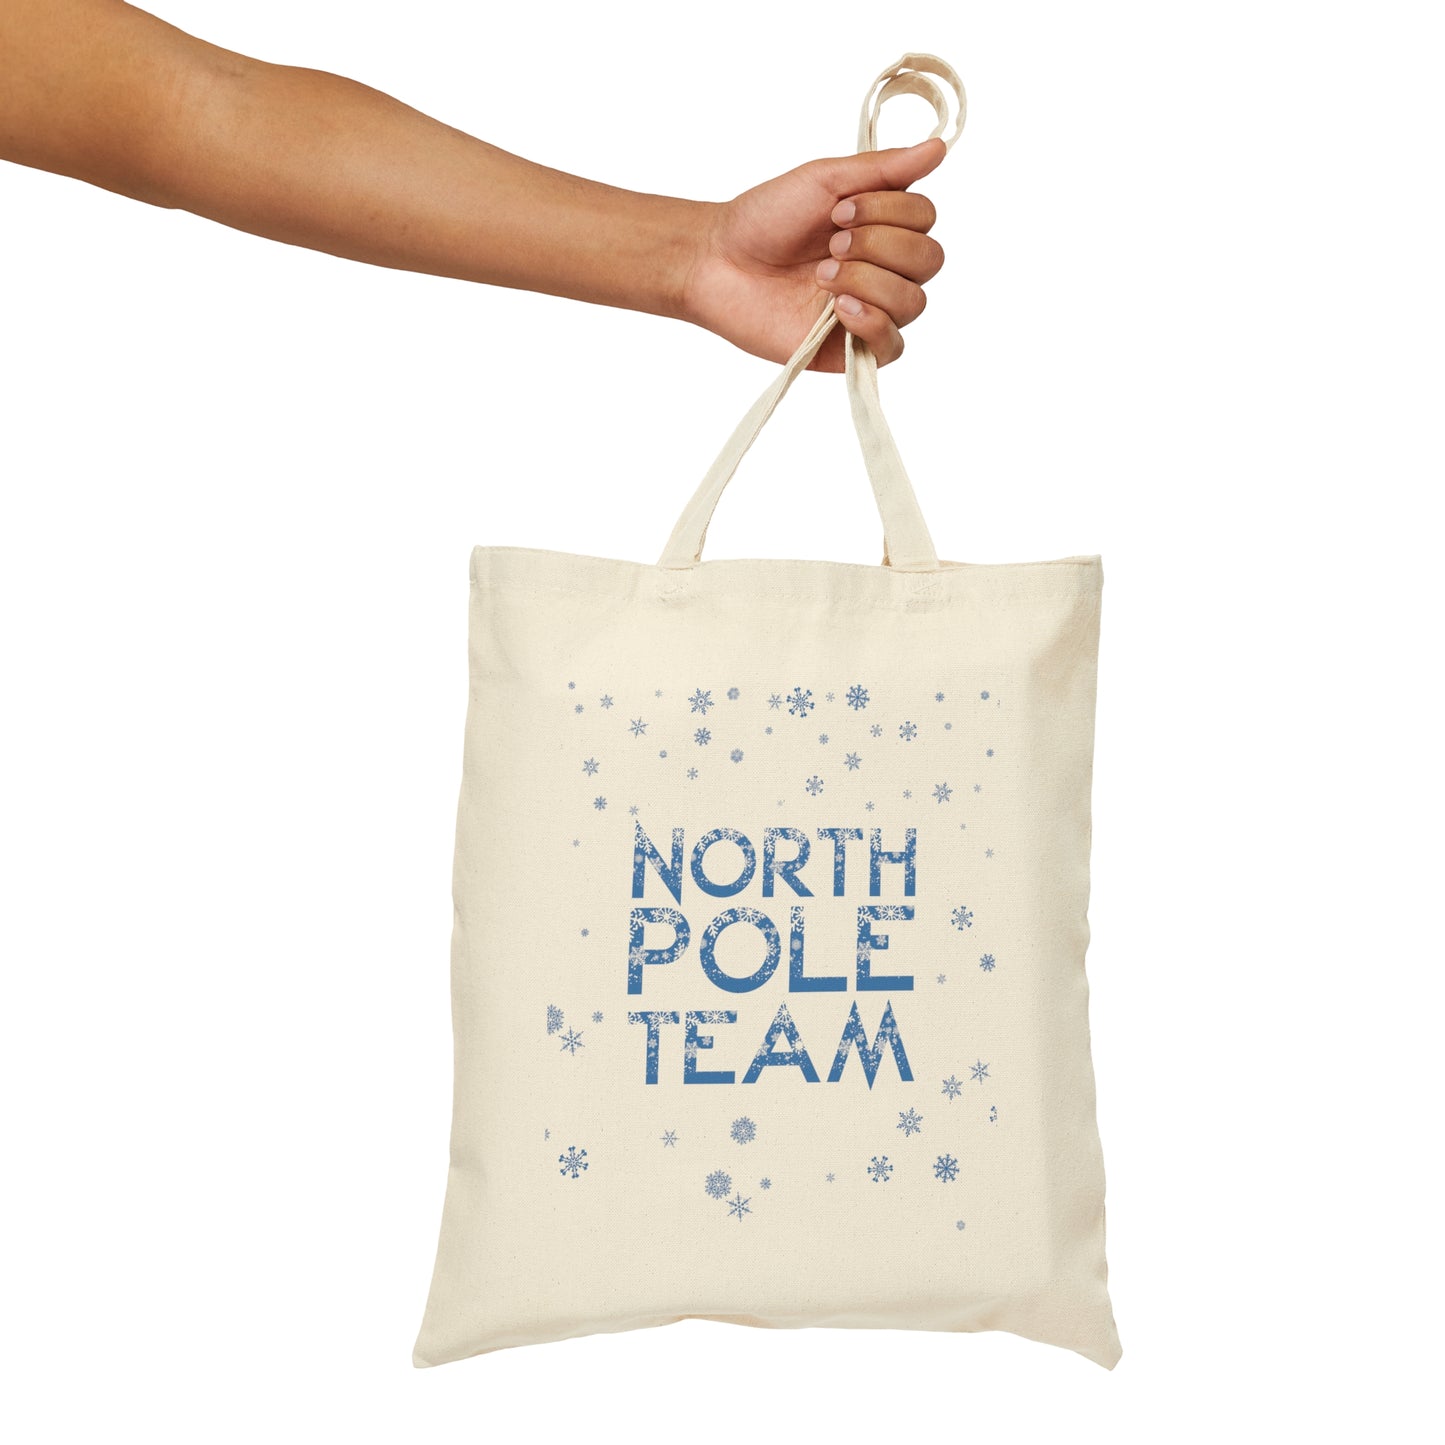 North Pole Team Winter Lovers Snowflake Canvas Shopping Cotton Tote Bag